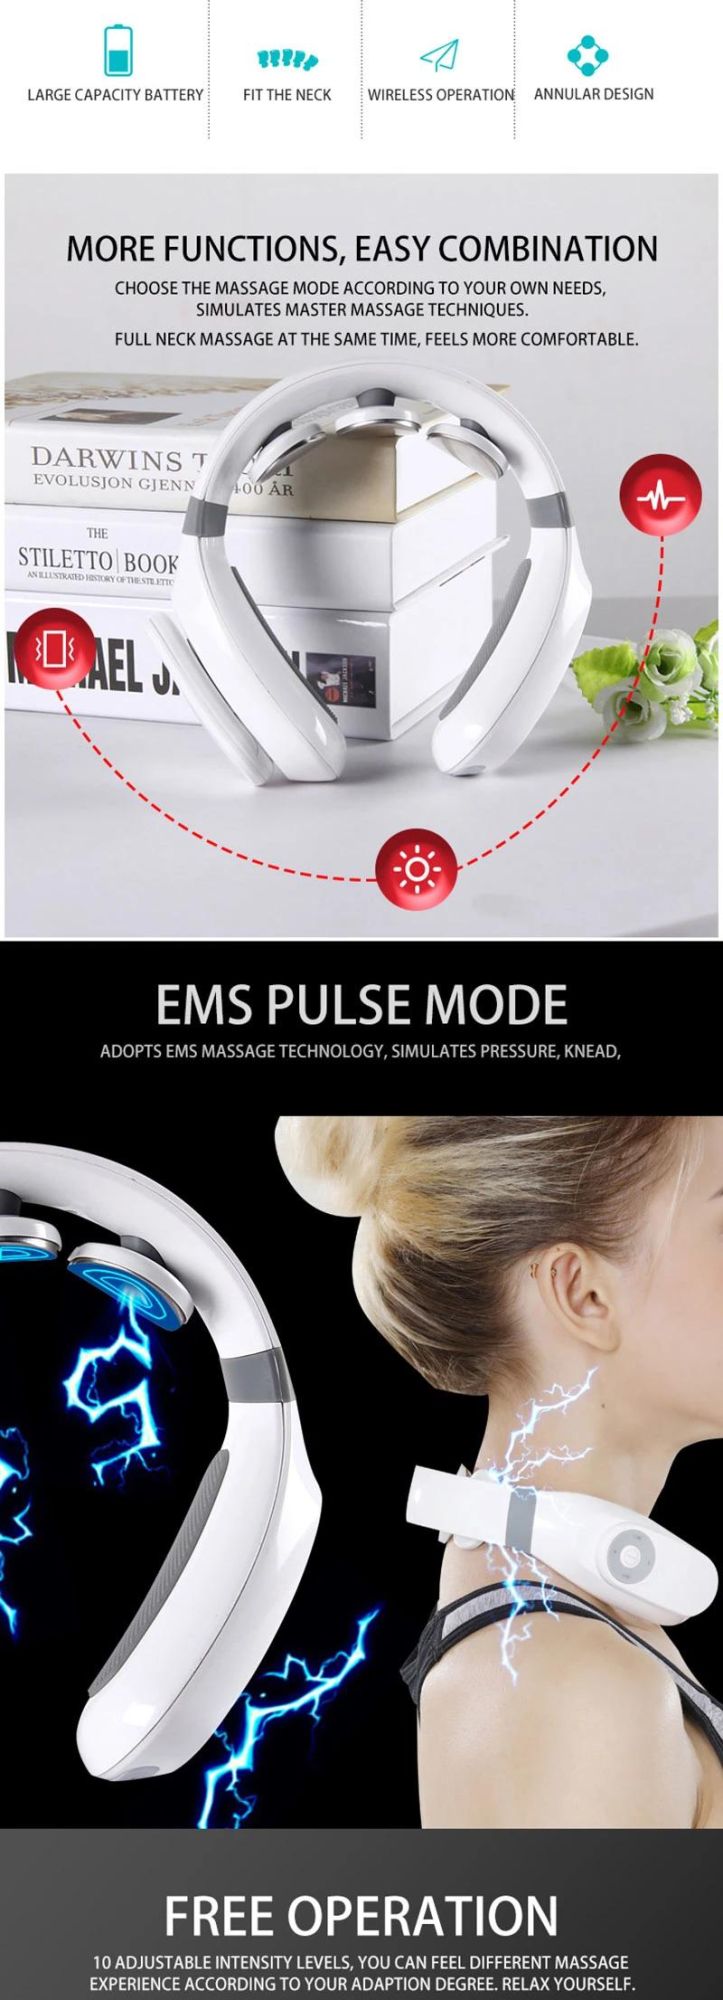 Smart Electric Neck and Shoulder Massager Intermediate Frequency Magnetic Therapy Pulse Pain Relief Relaxation Vertebra Physiotherapy